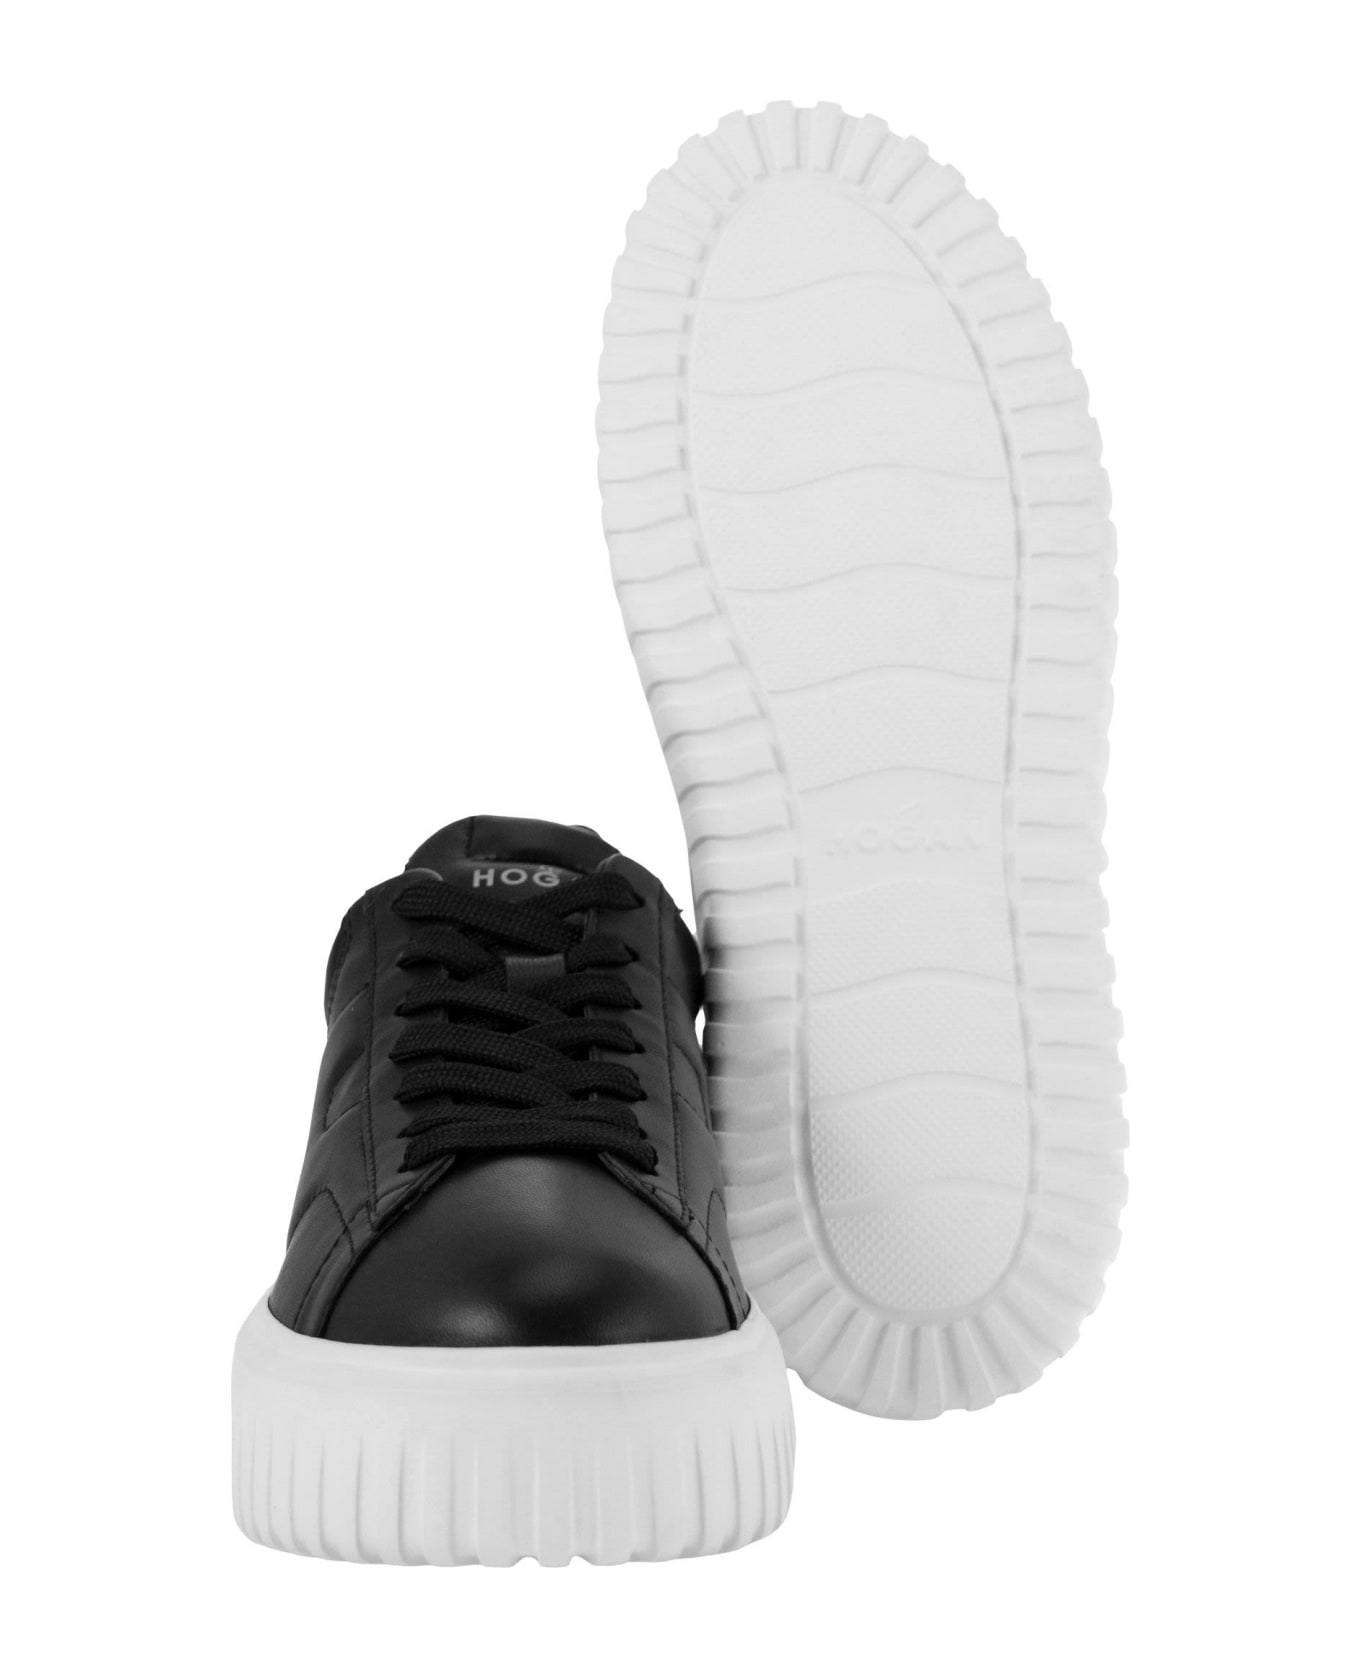 Hogan H-stripes Sneakers In Nappa Leather - Black/white ウェッジシューズ